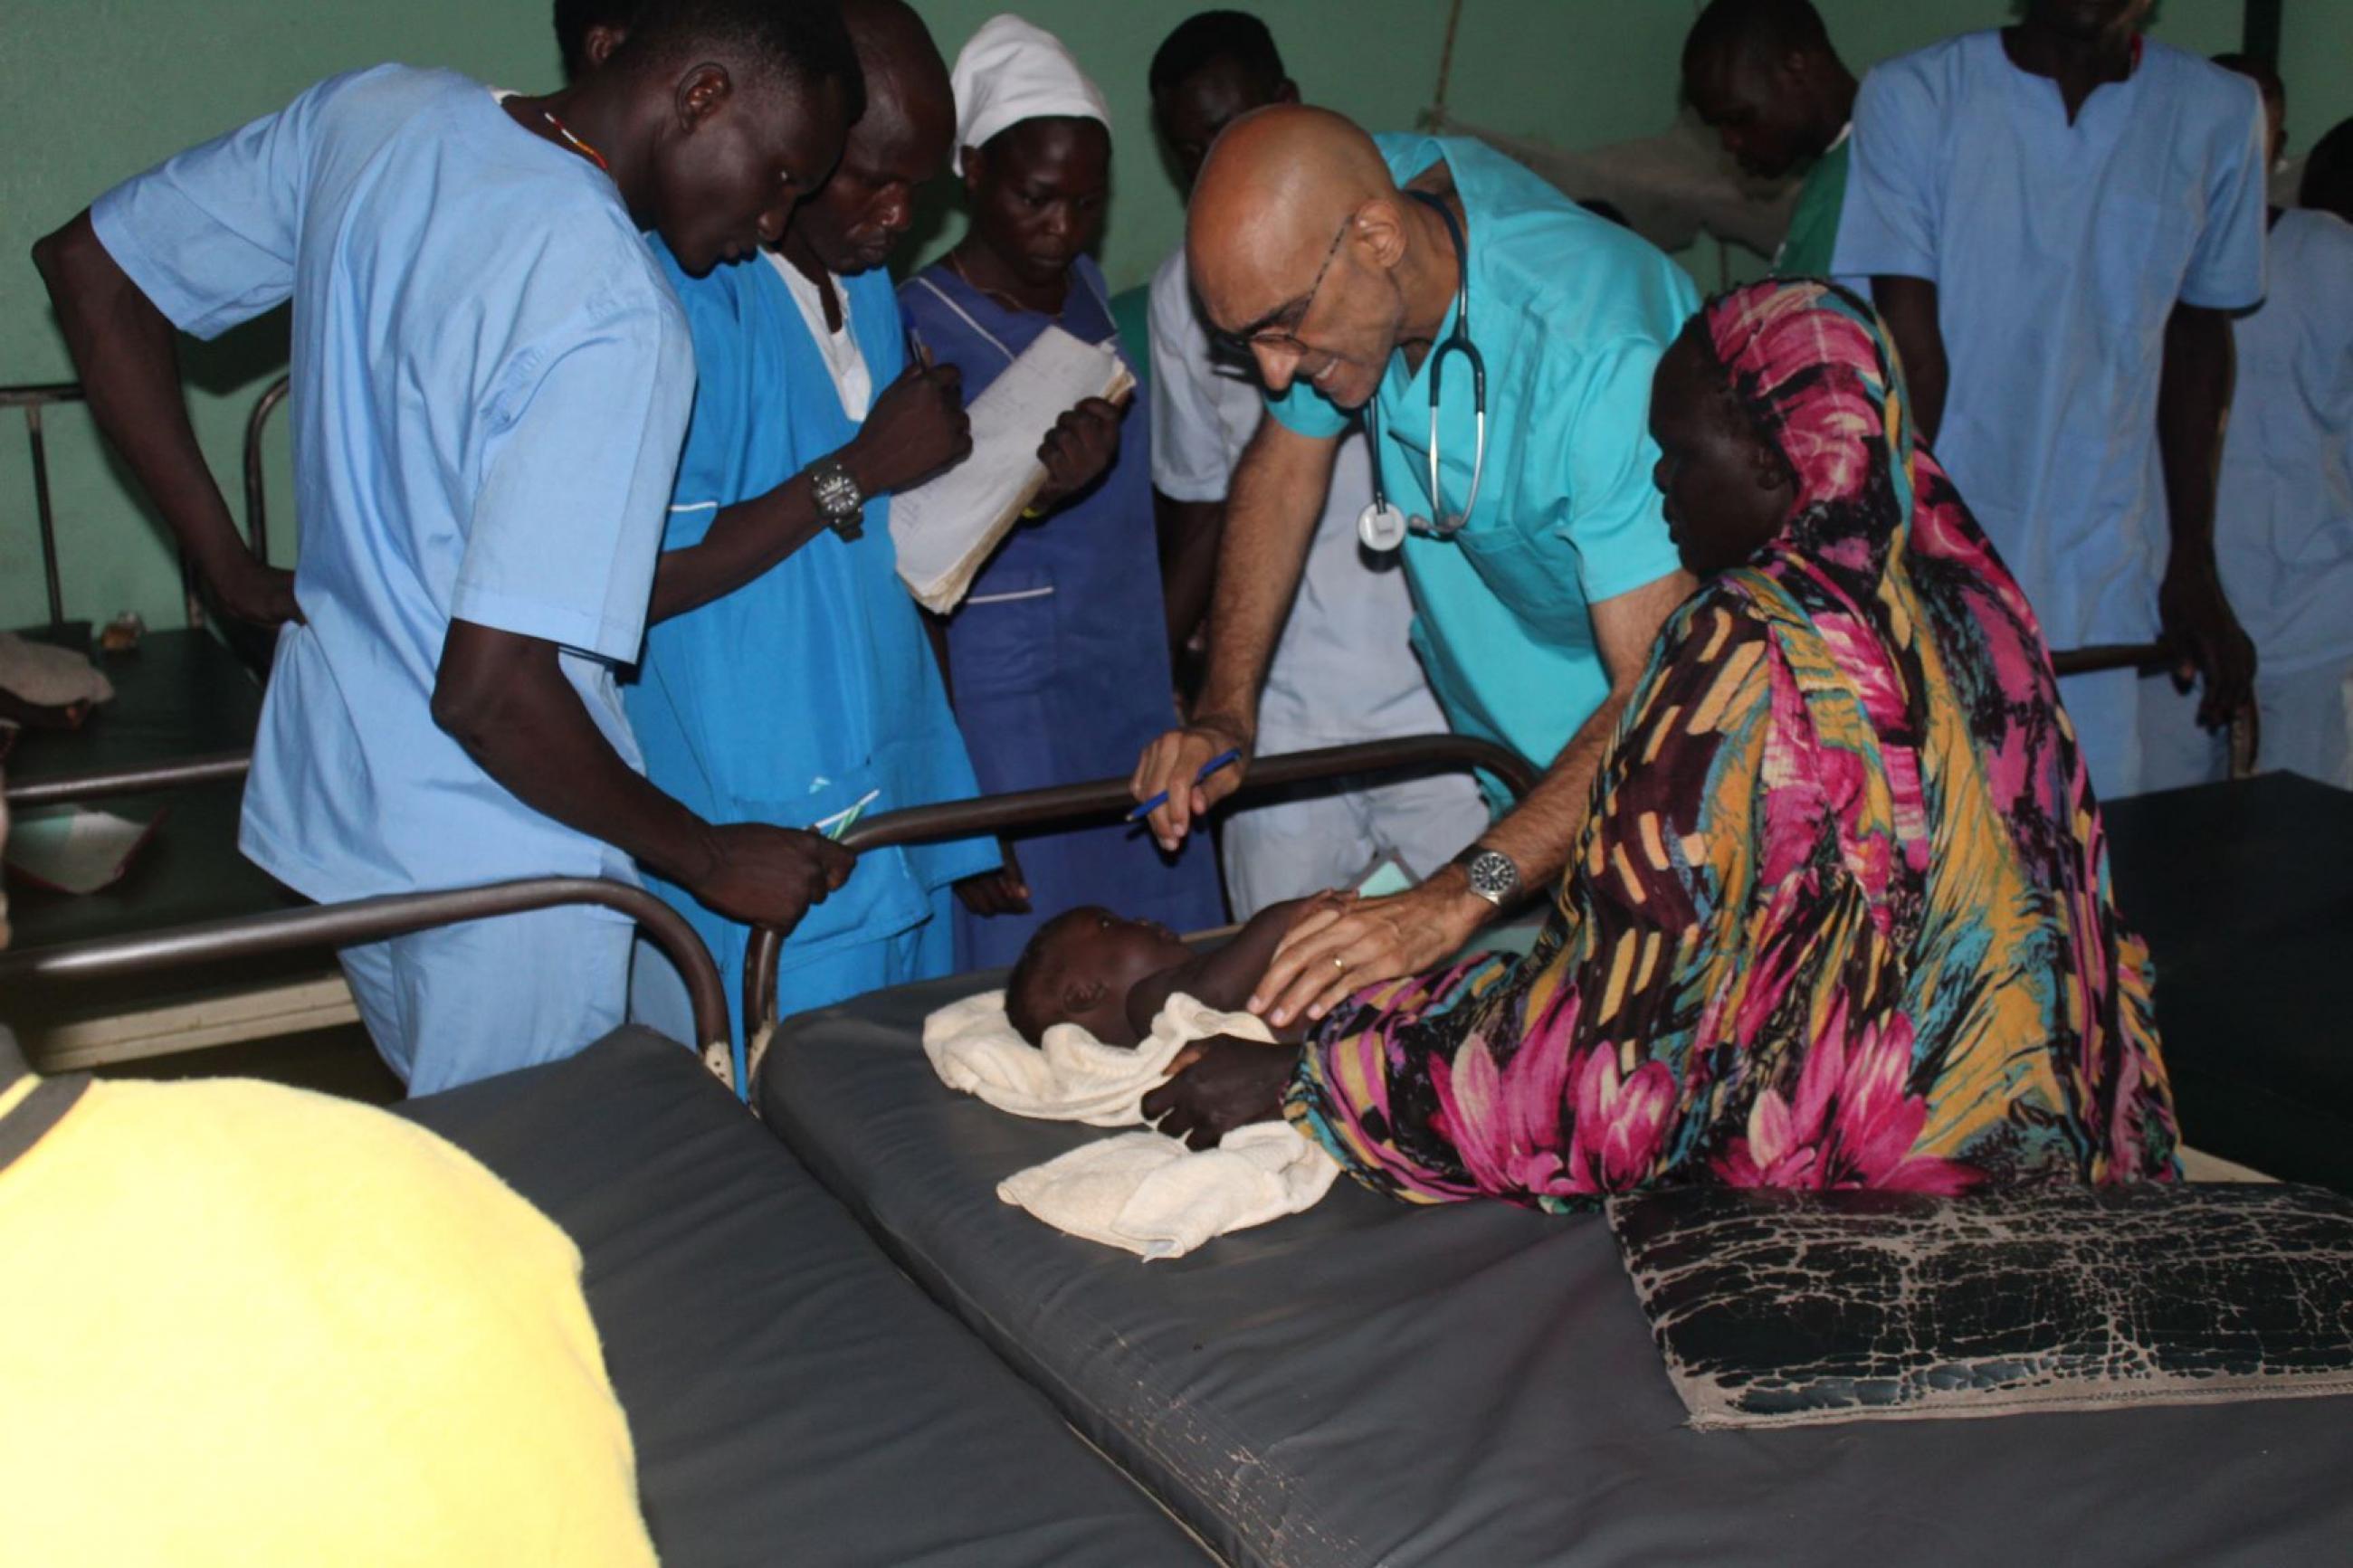 Dr. Tom Catena tends to a patient, at Mother of Mercy hospital, in Sudan.